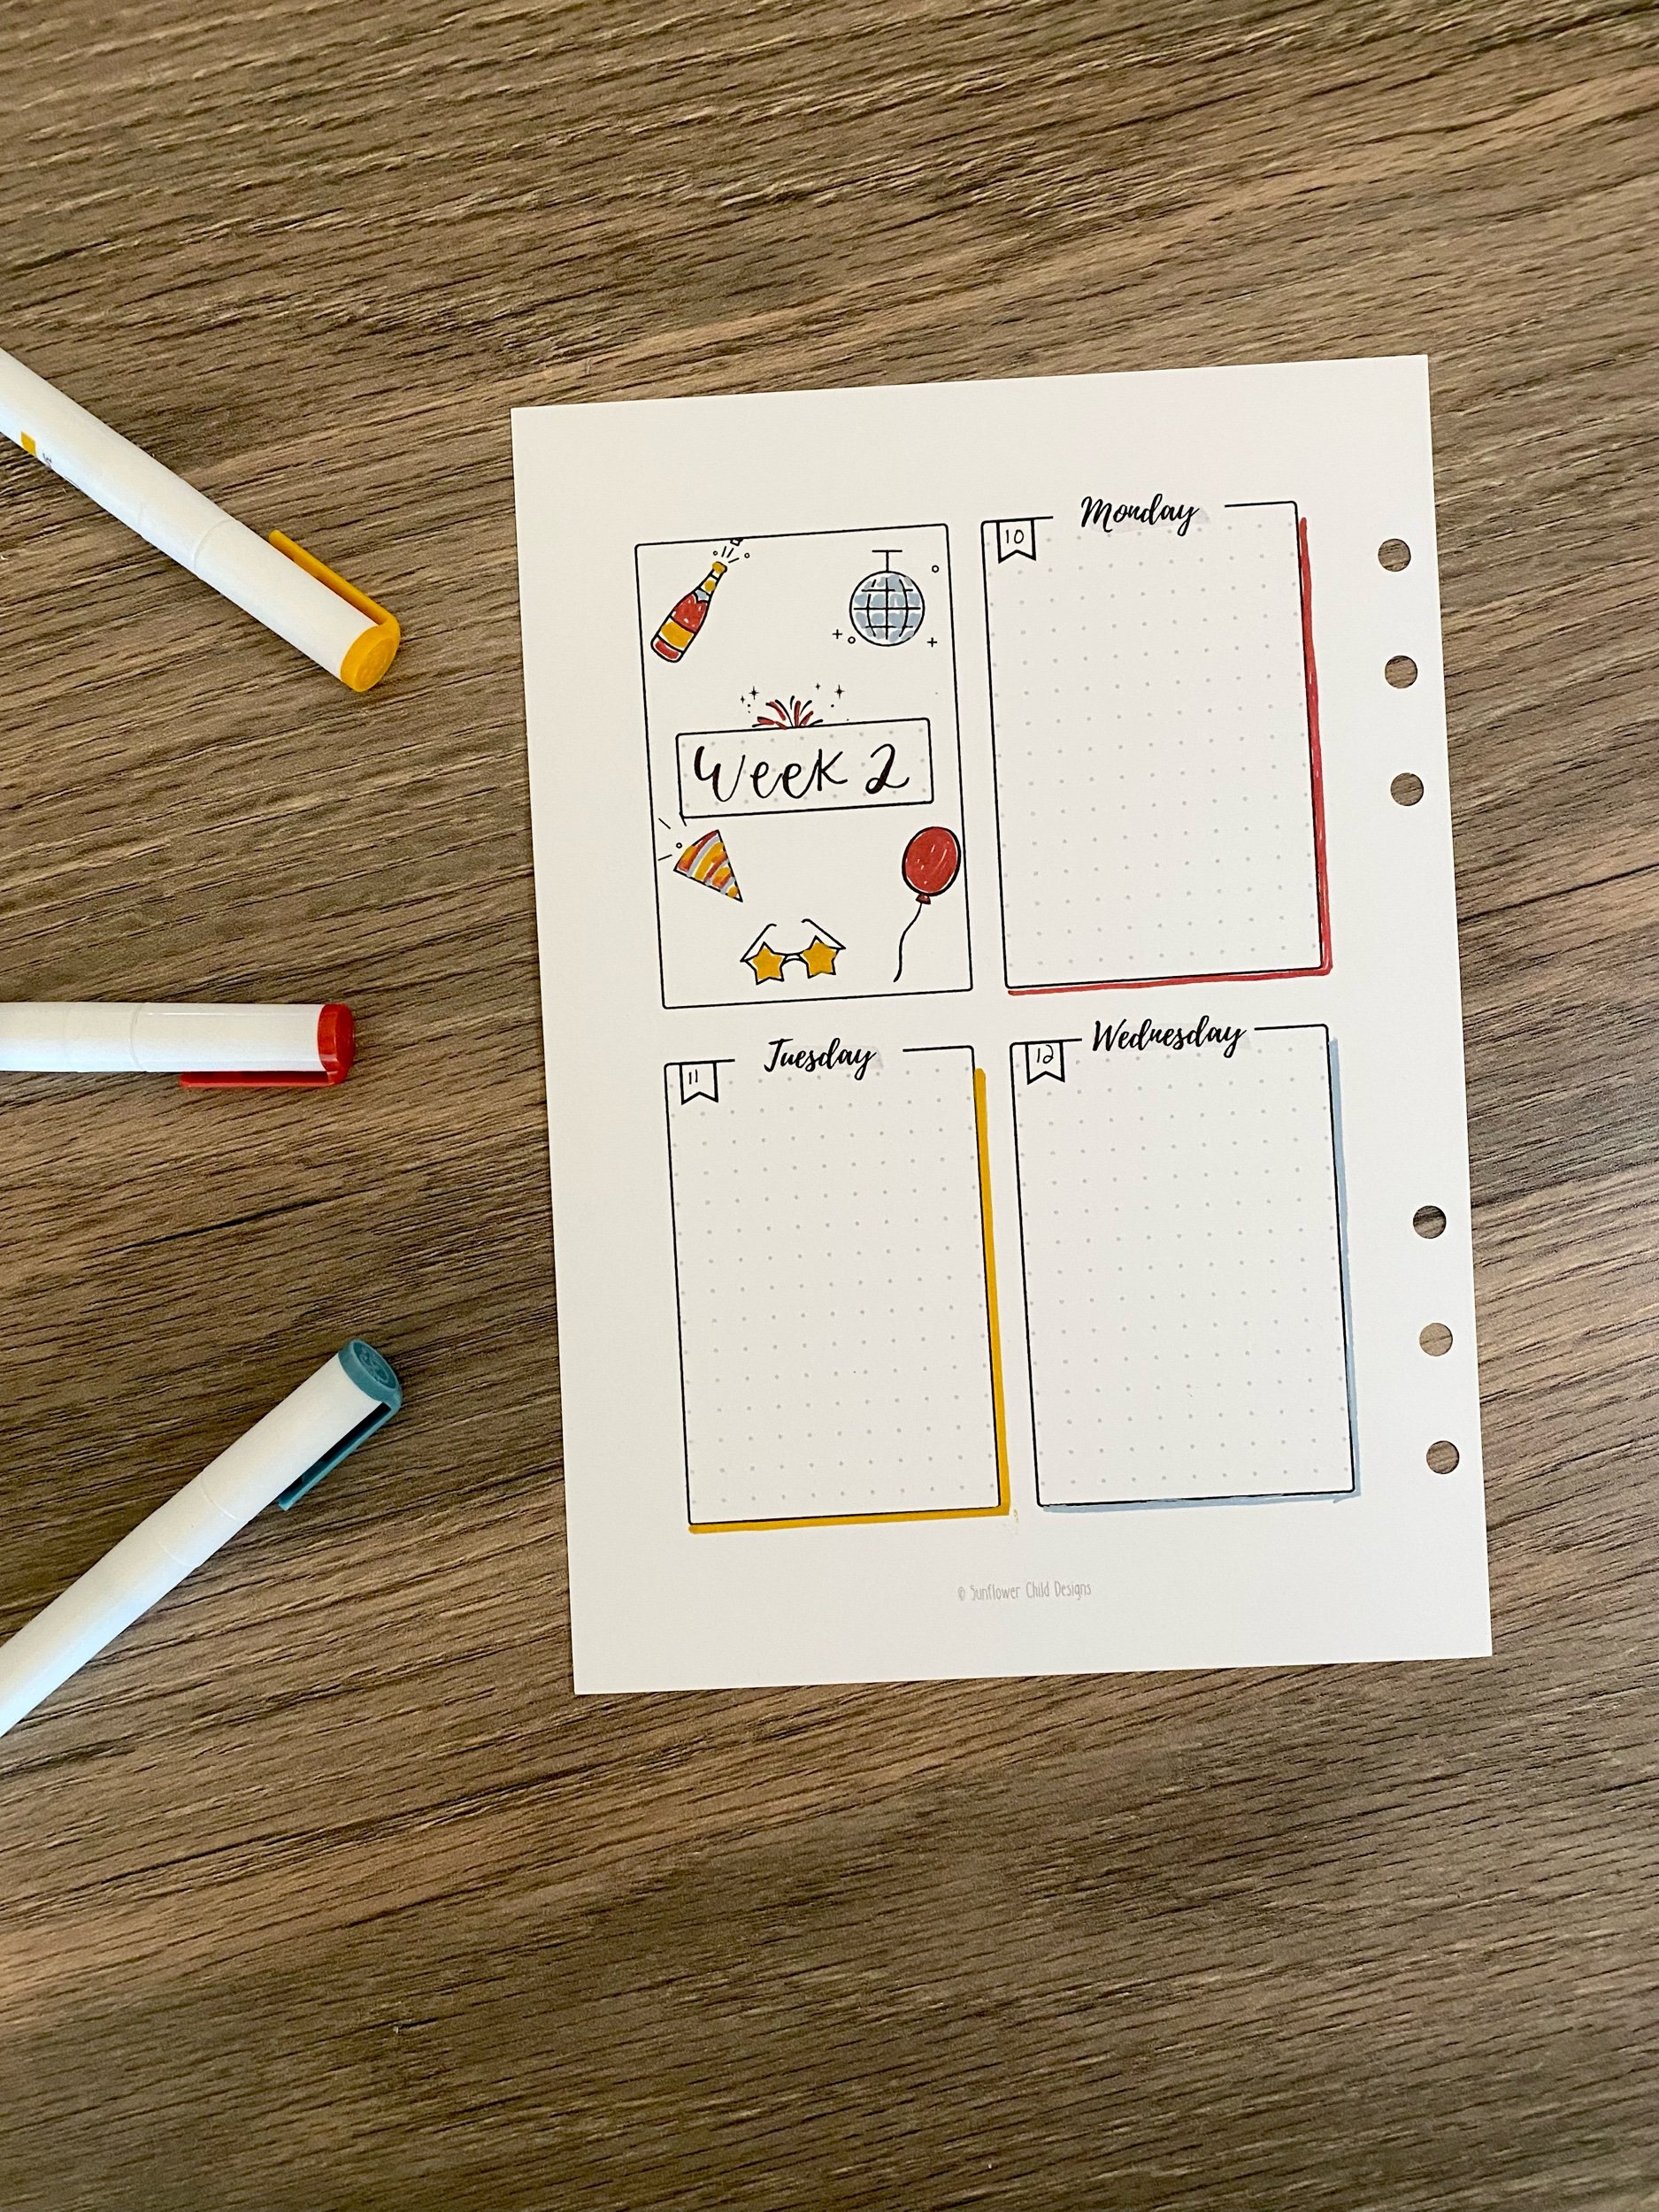 New Year's Celebration Monthly Bullet Journal Setup - Any Month - undated -  headings optional - dot grid — Sunflower Child Designs